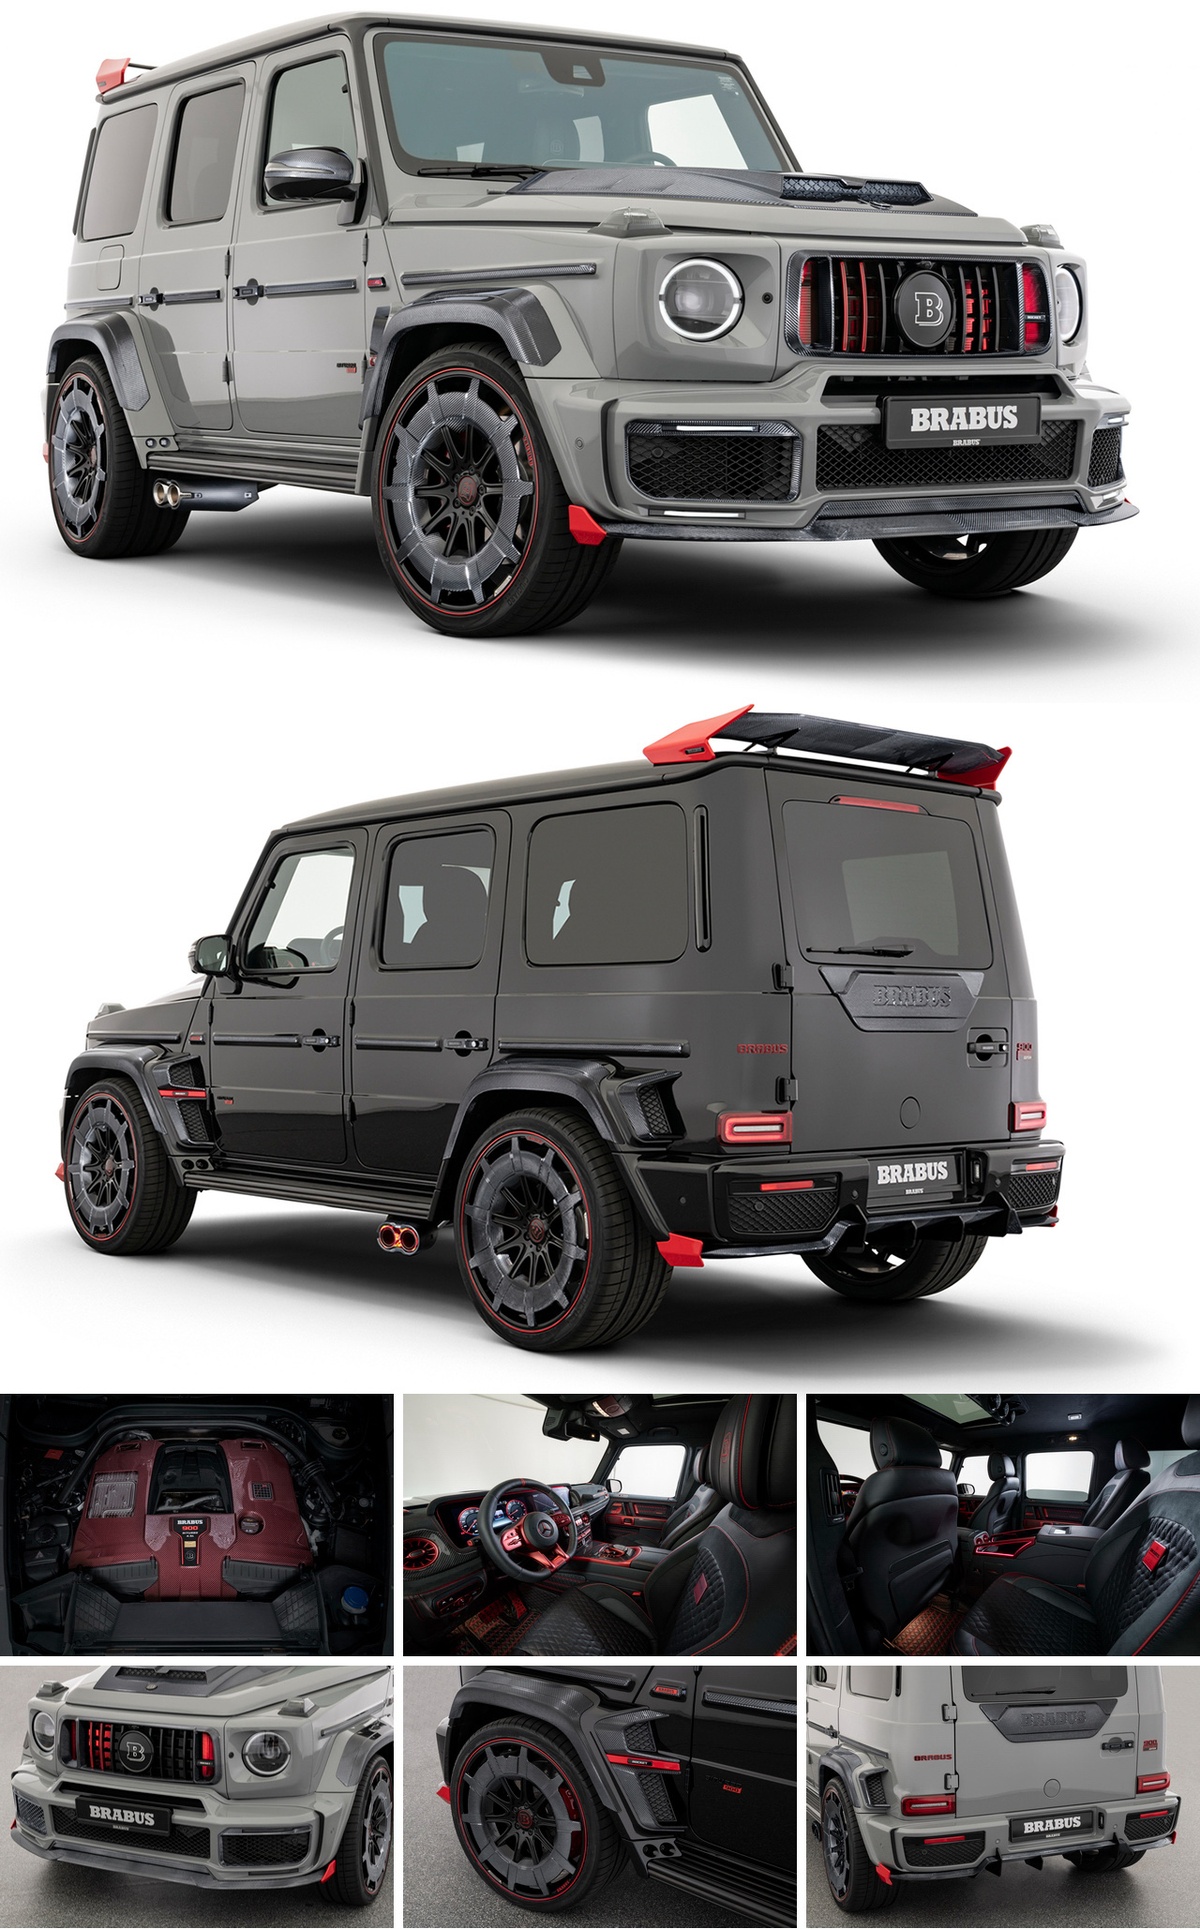 Brabus 900 Rocket Edition The New Brabus Limited Edition Supercar Based On The G 63 Ai Online